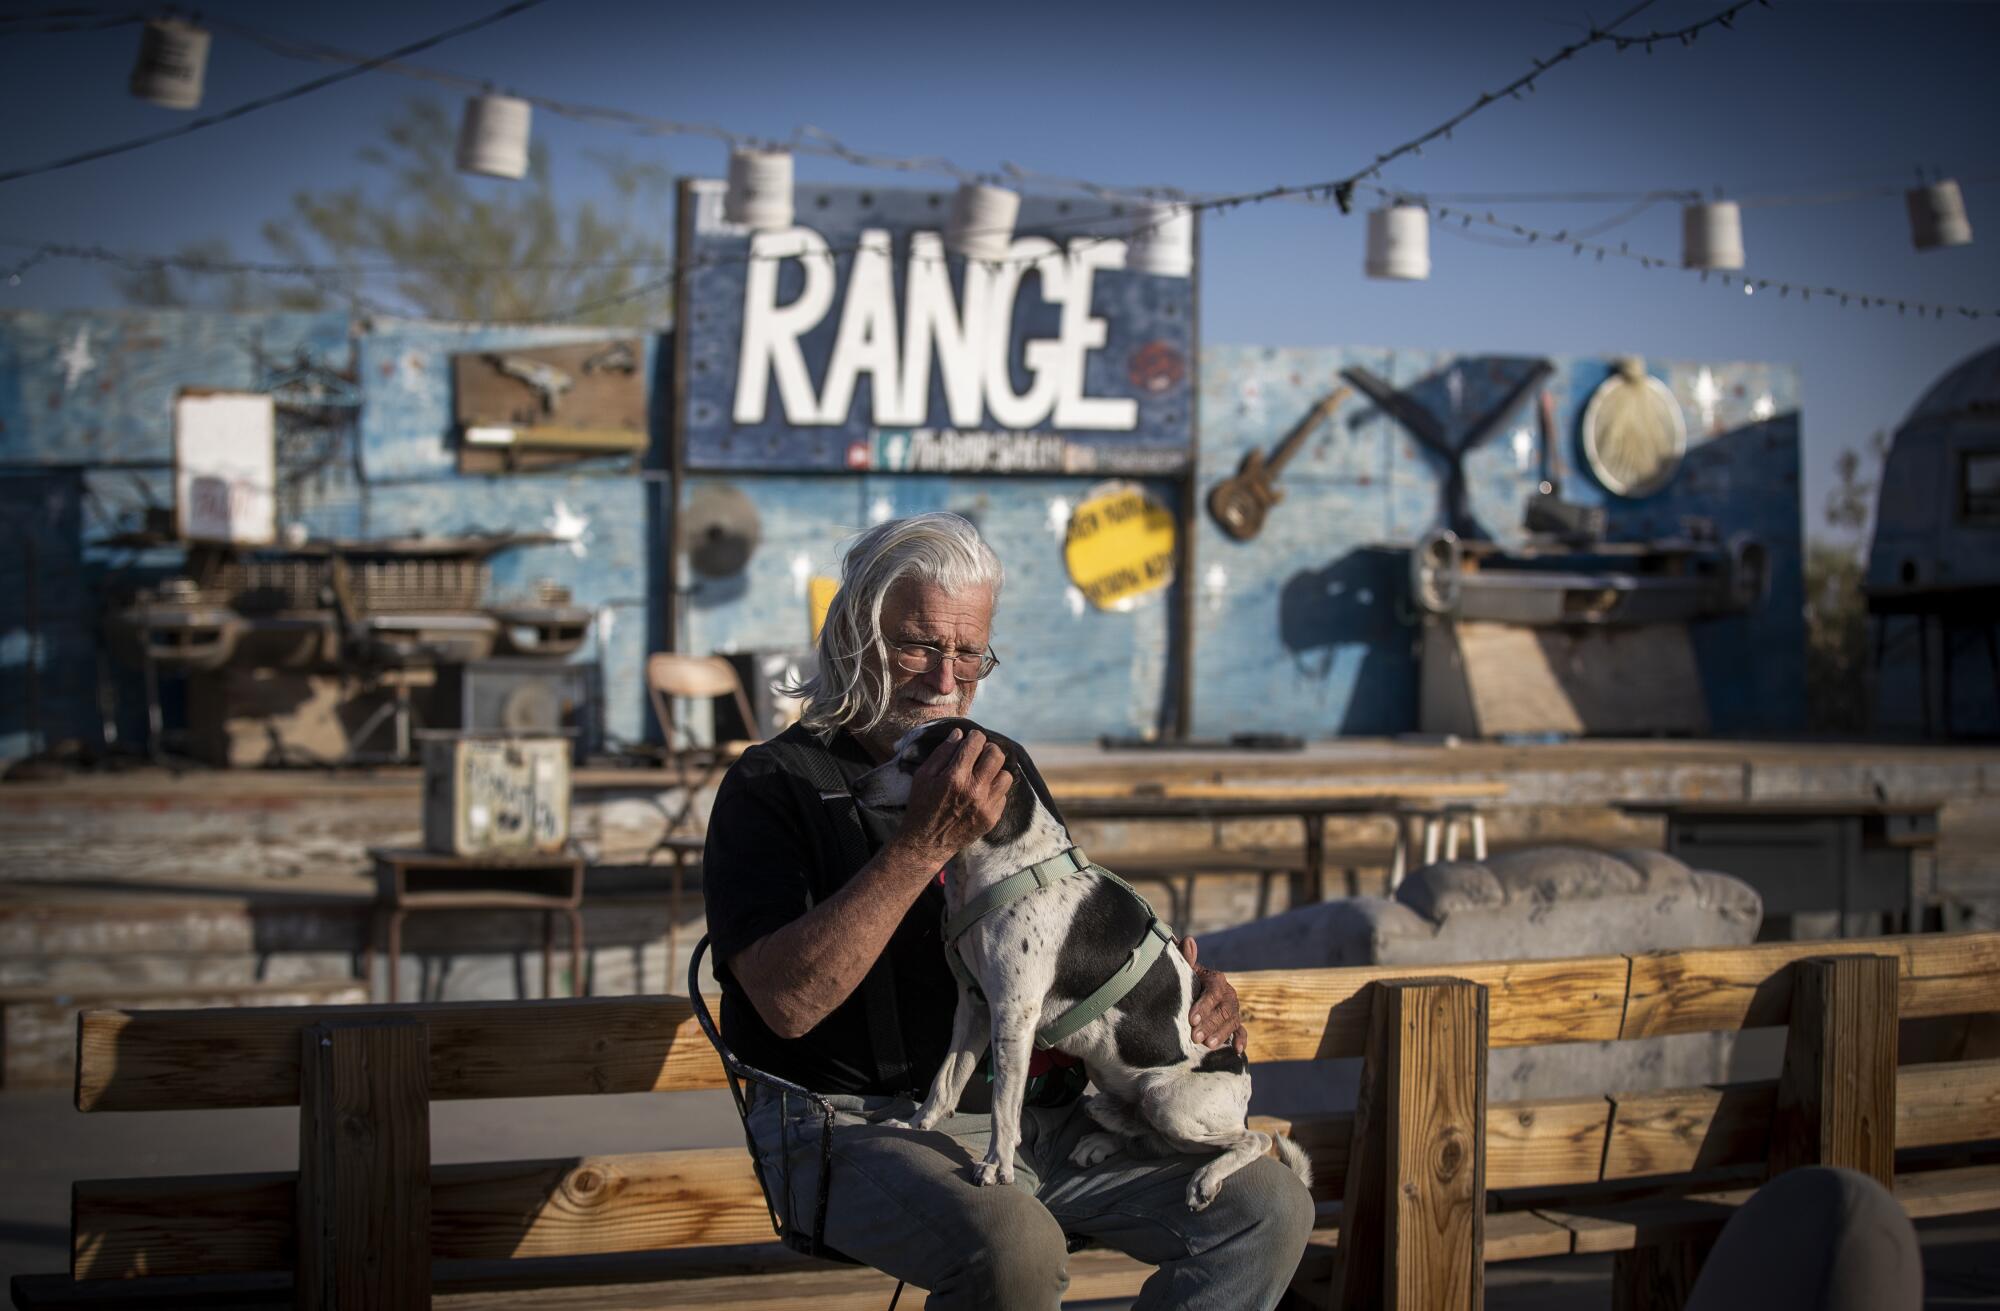 A man sits on a chair with a dog in has lap at an outdoor music stage with a sign that says "the Range"